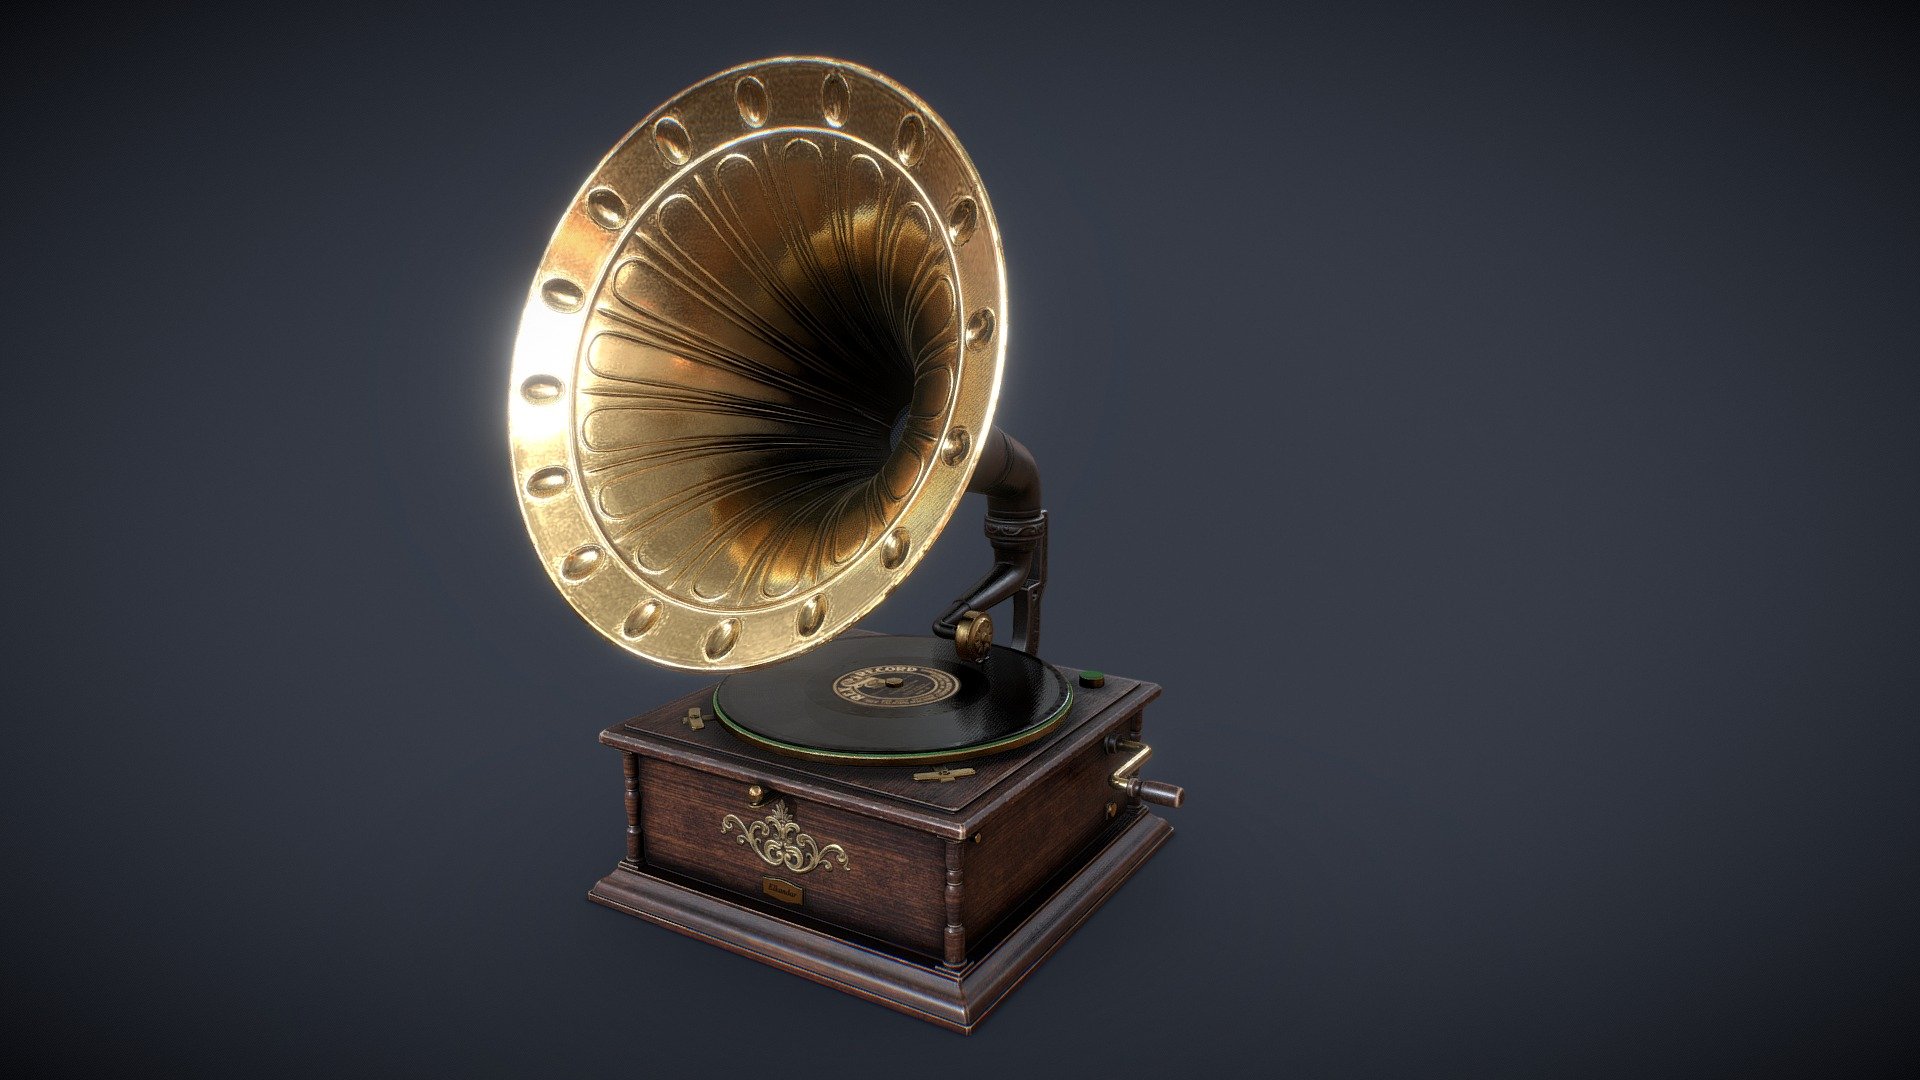 Hello all :) This is an other asset for a victorian project. A wood and golden phonograph to play good and old songs.

Made with Maya, PS and Substance.

You will find in the package Scene file, FBX and 2k Textures.
If you have any customs need, please feel free to contact me 3d model